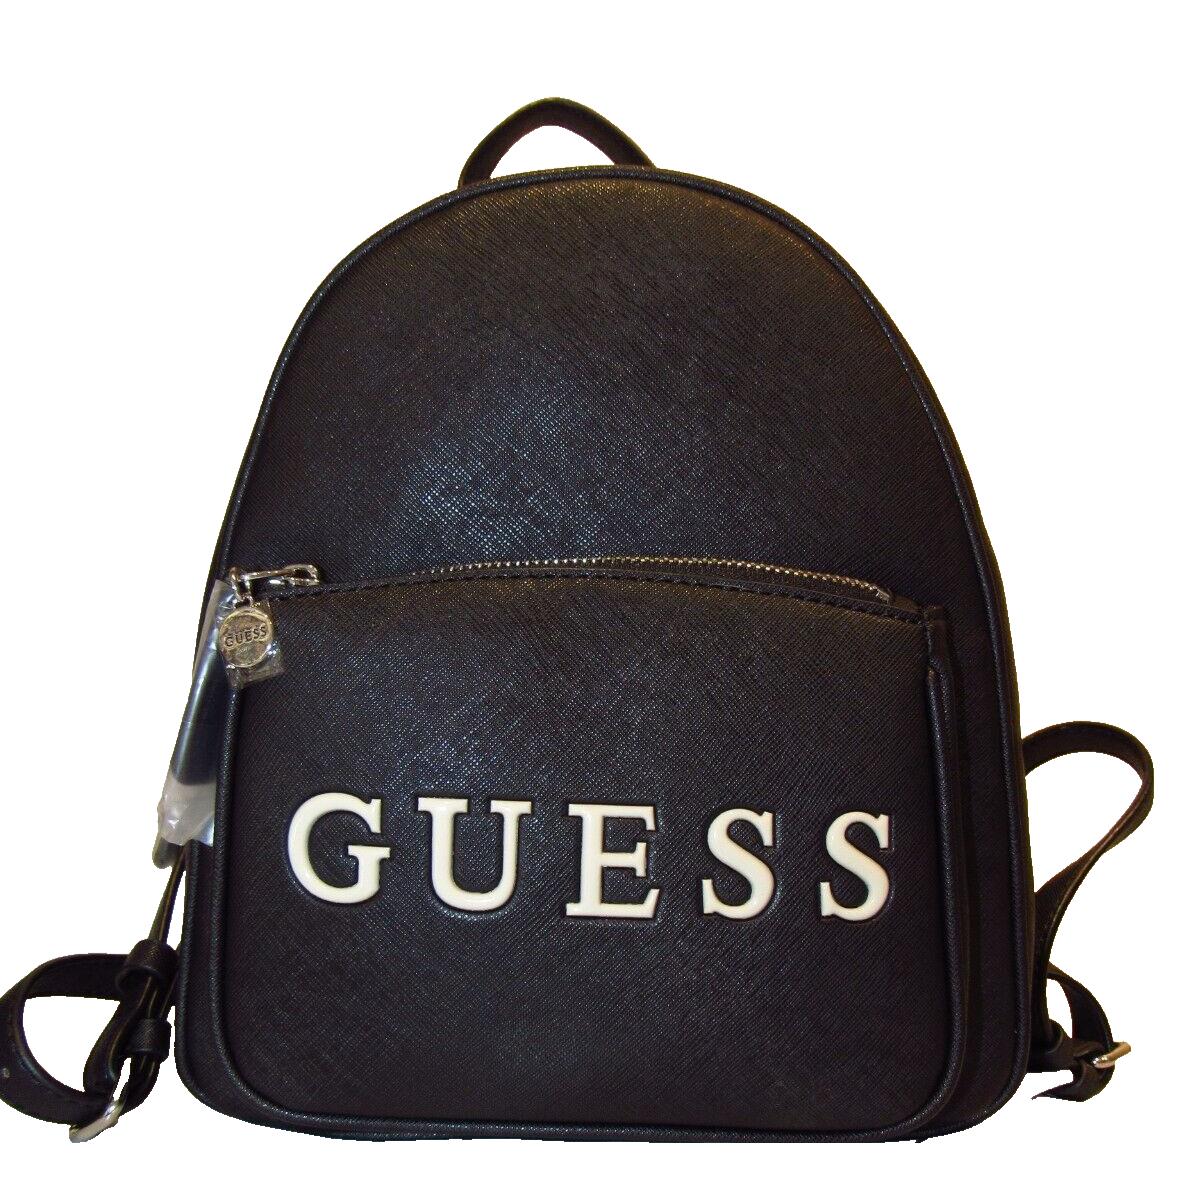 Roxbury Guess Backpack Hand/shoulder Bag in Black Free US Shipping